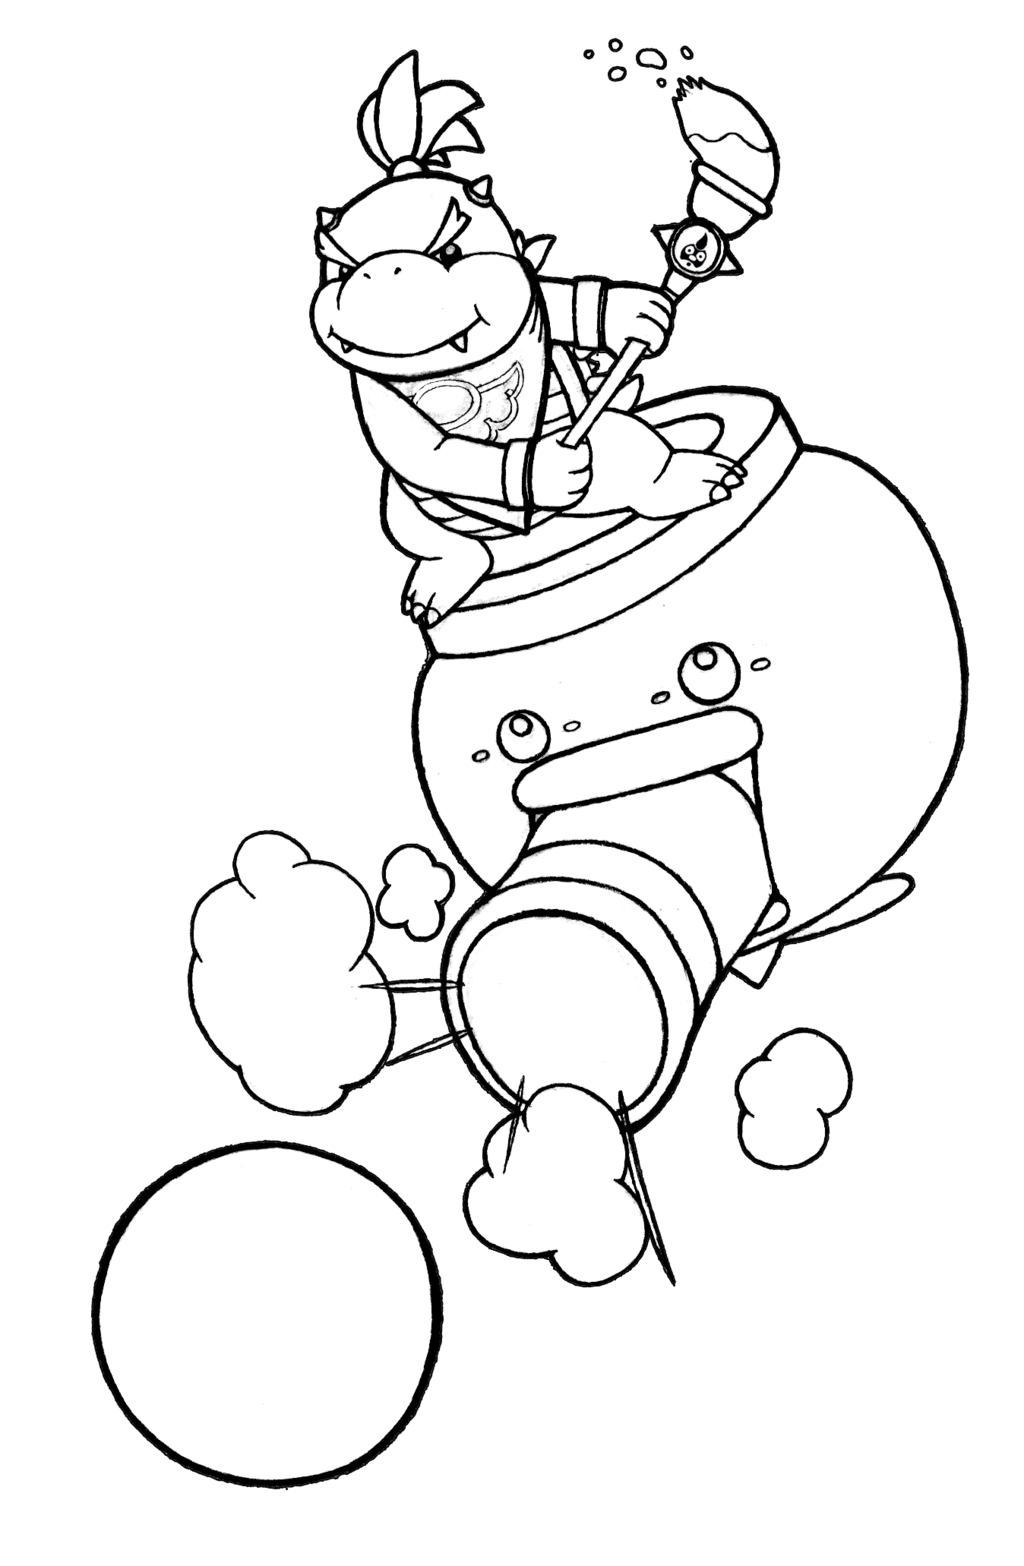 Bowser Coloring Pages Sons | Coloring Pages For All Ages